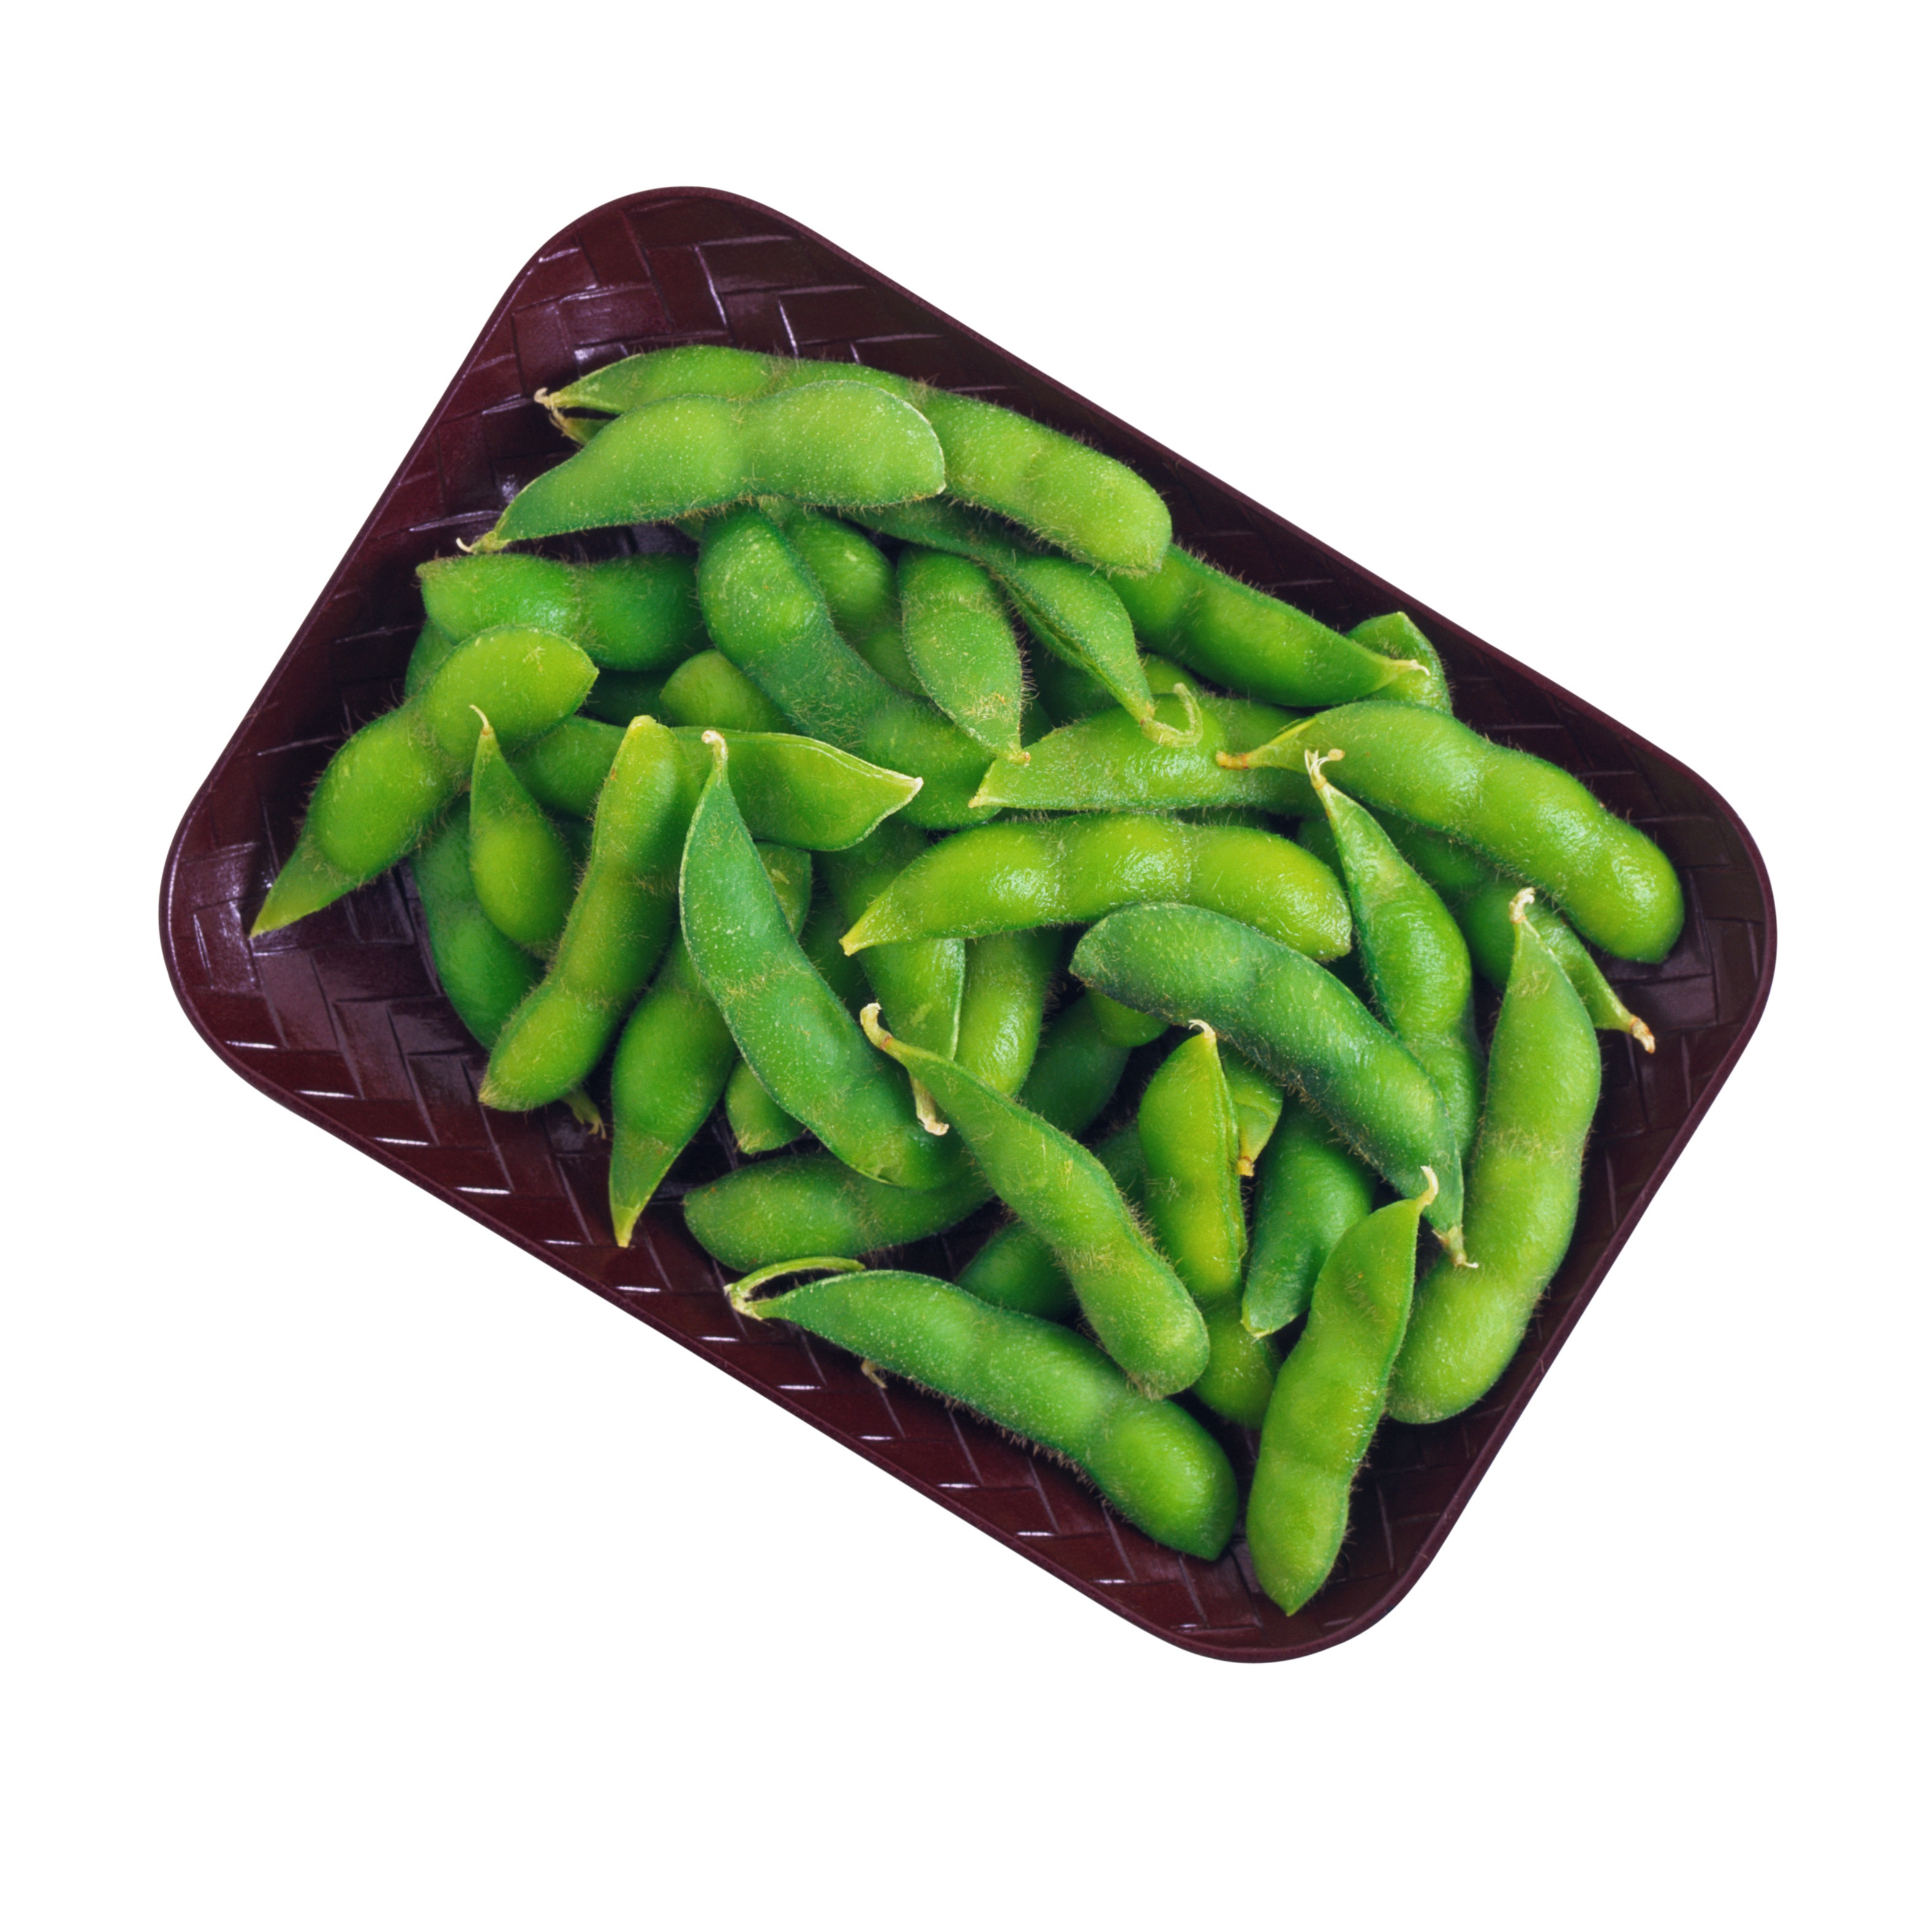 edamame beans are a great evening snack